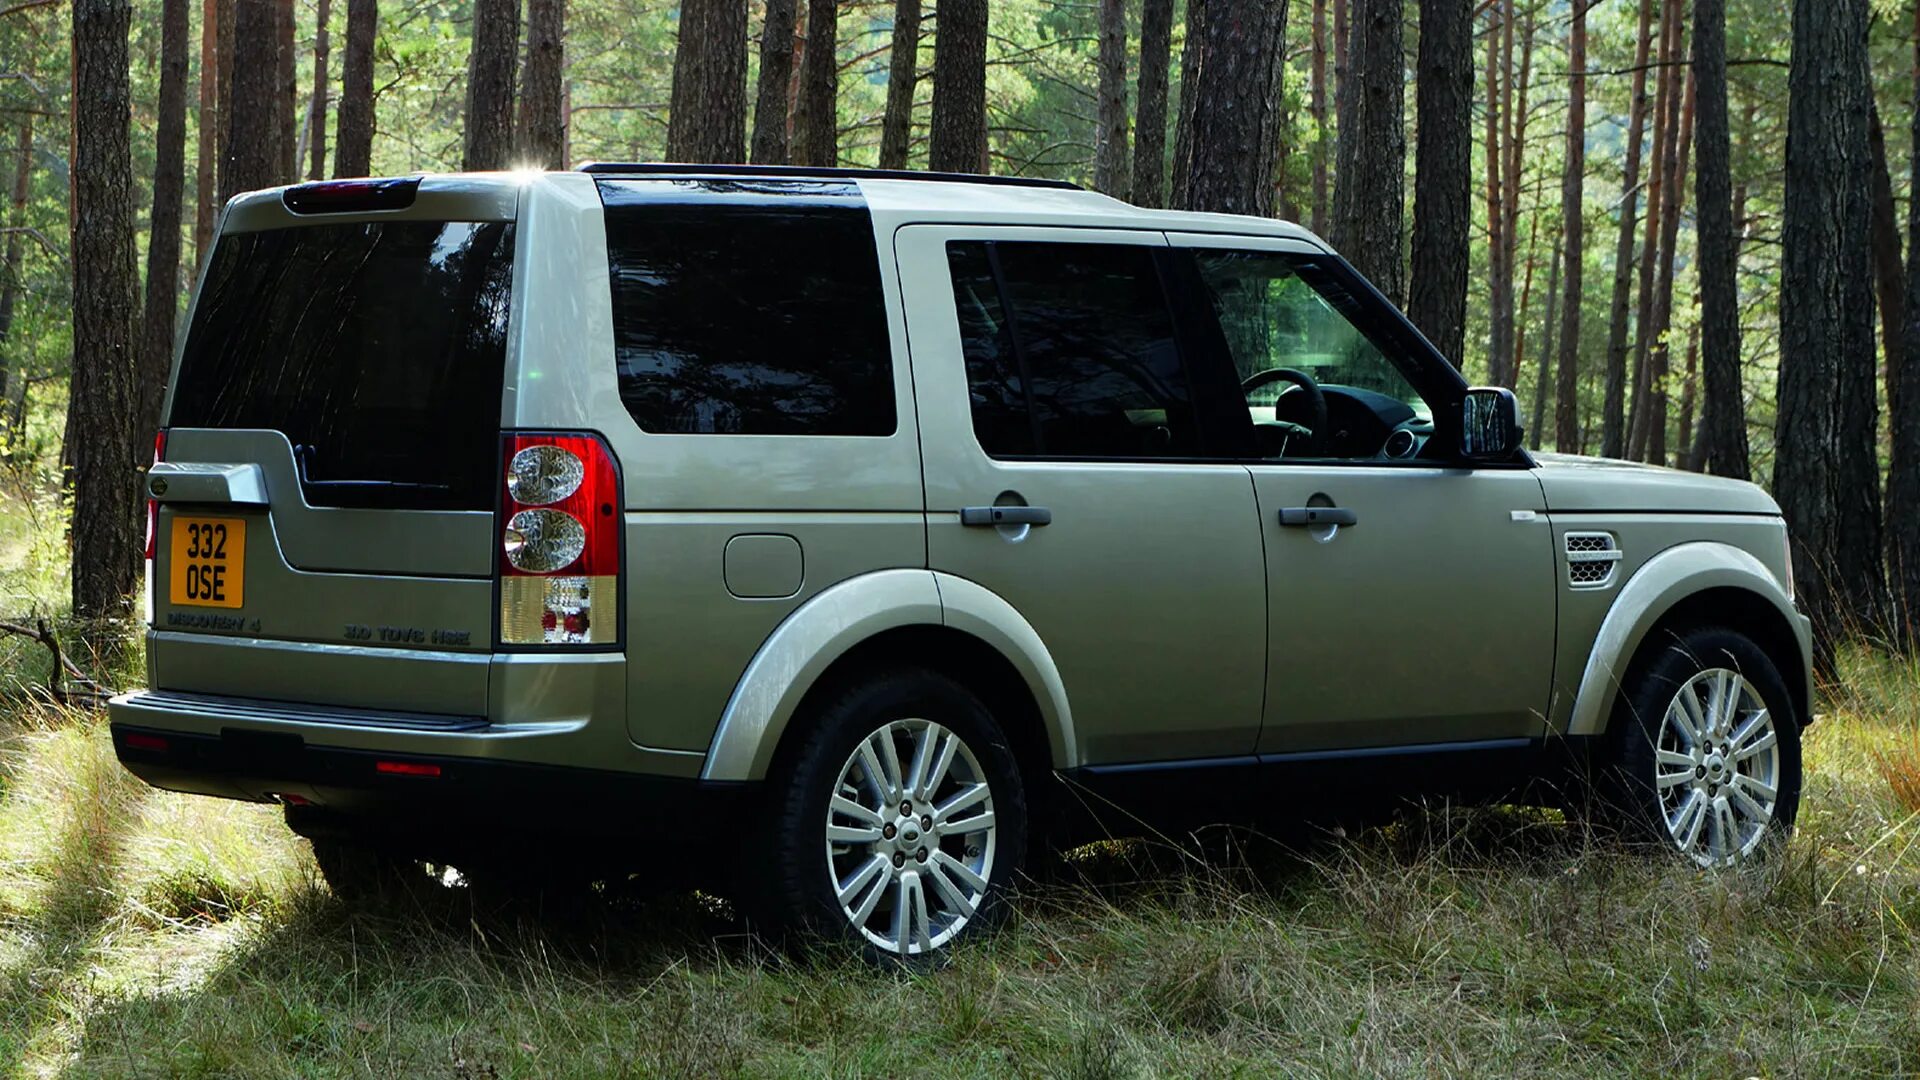 Land Rover Discovery 4. Ленд Ровер Дискавери 4 2009. Лэнд ровыер Дискавери 4. Ленд Ровер Дискавери 4 2014. Дискавери 4 2